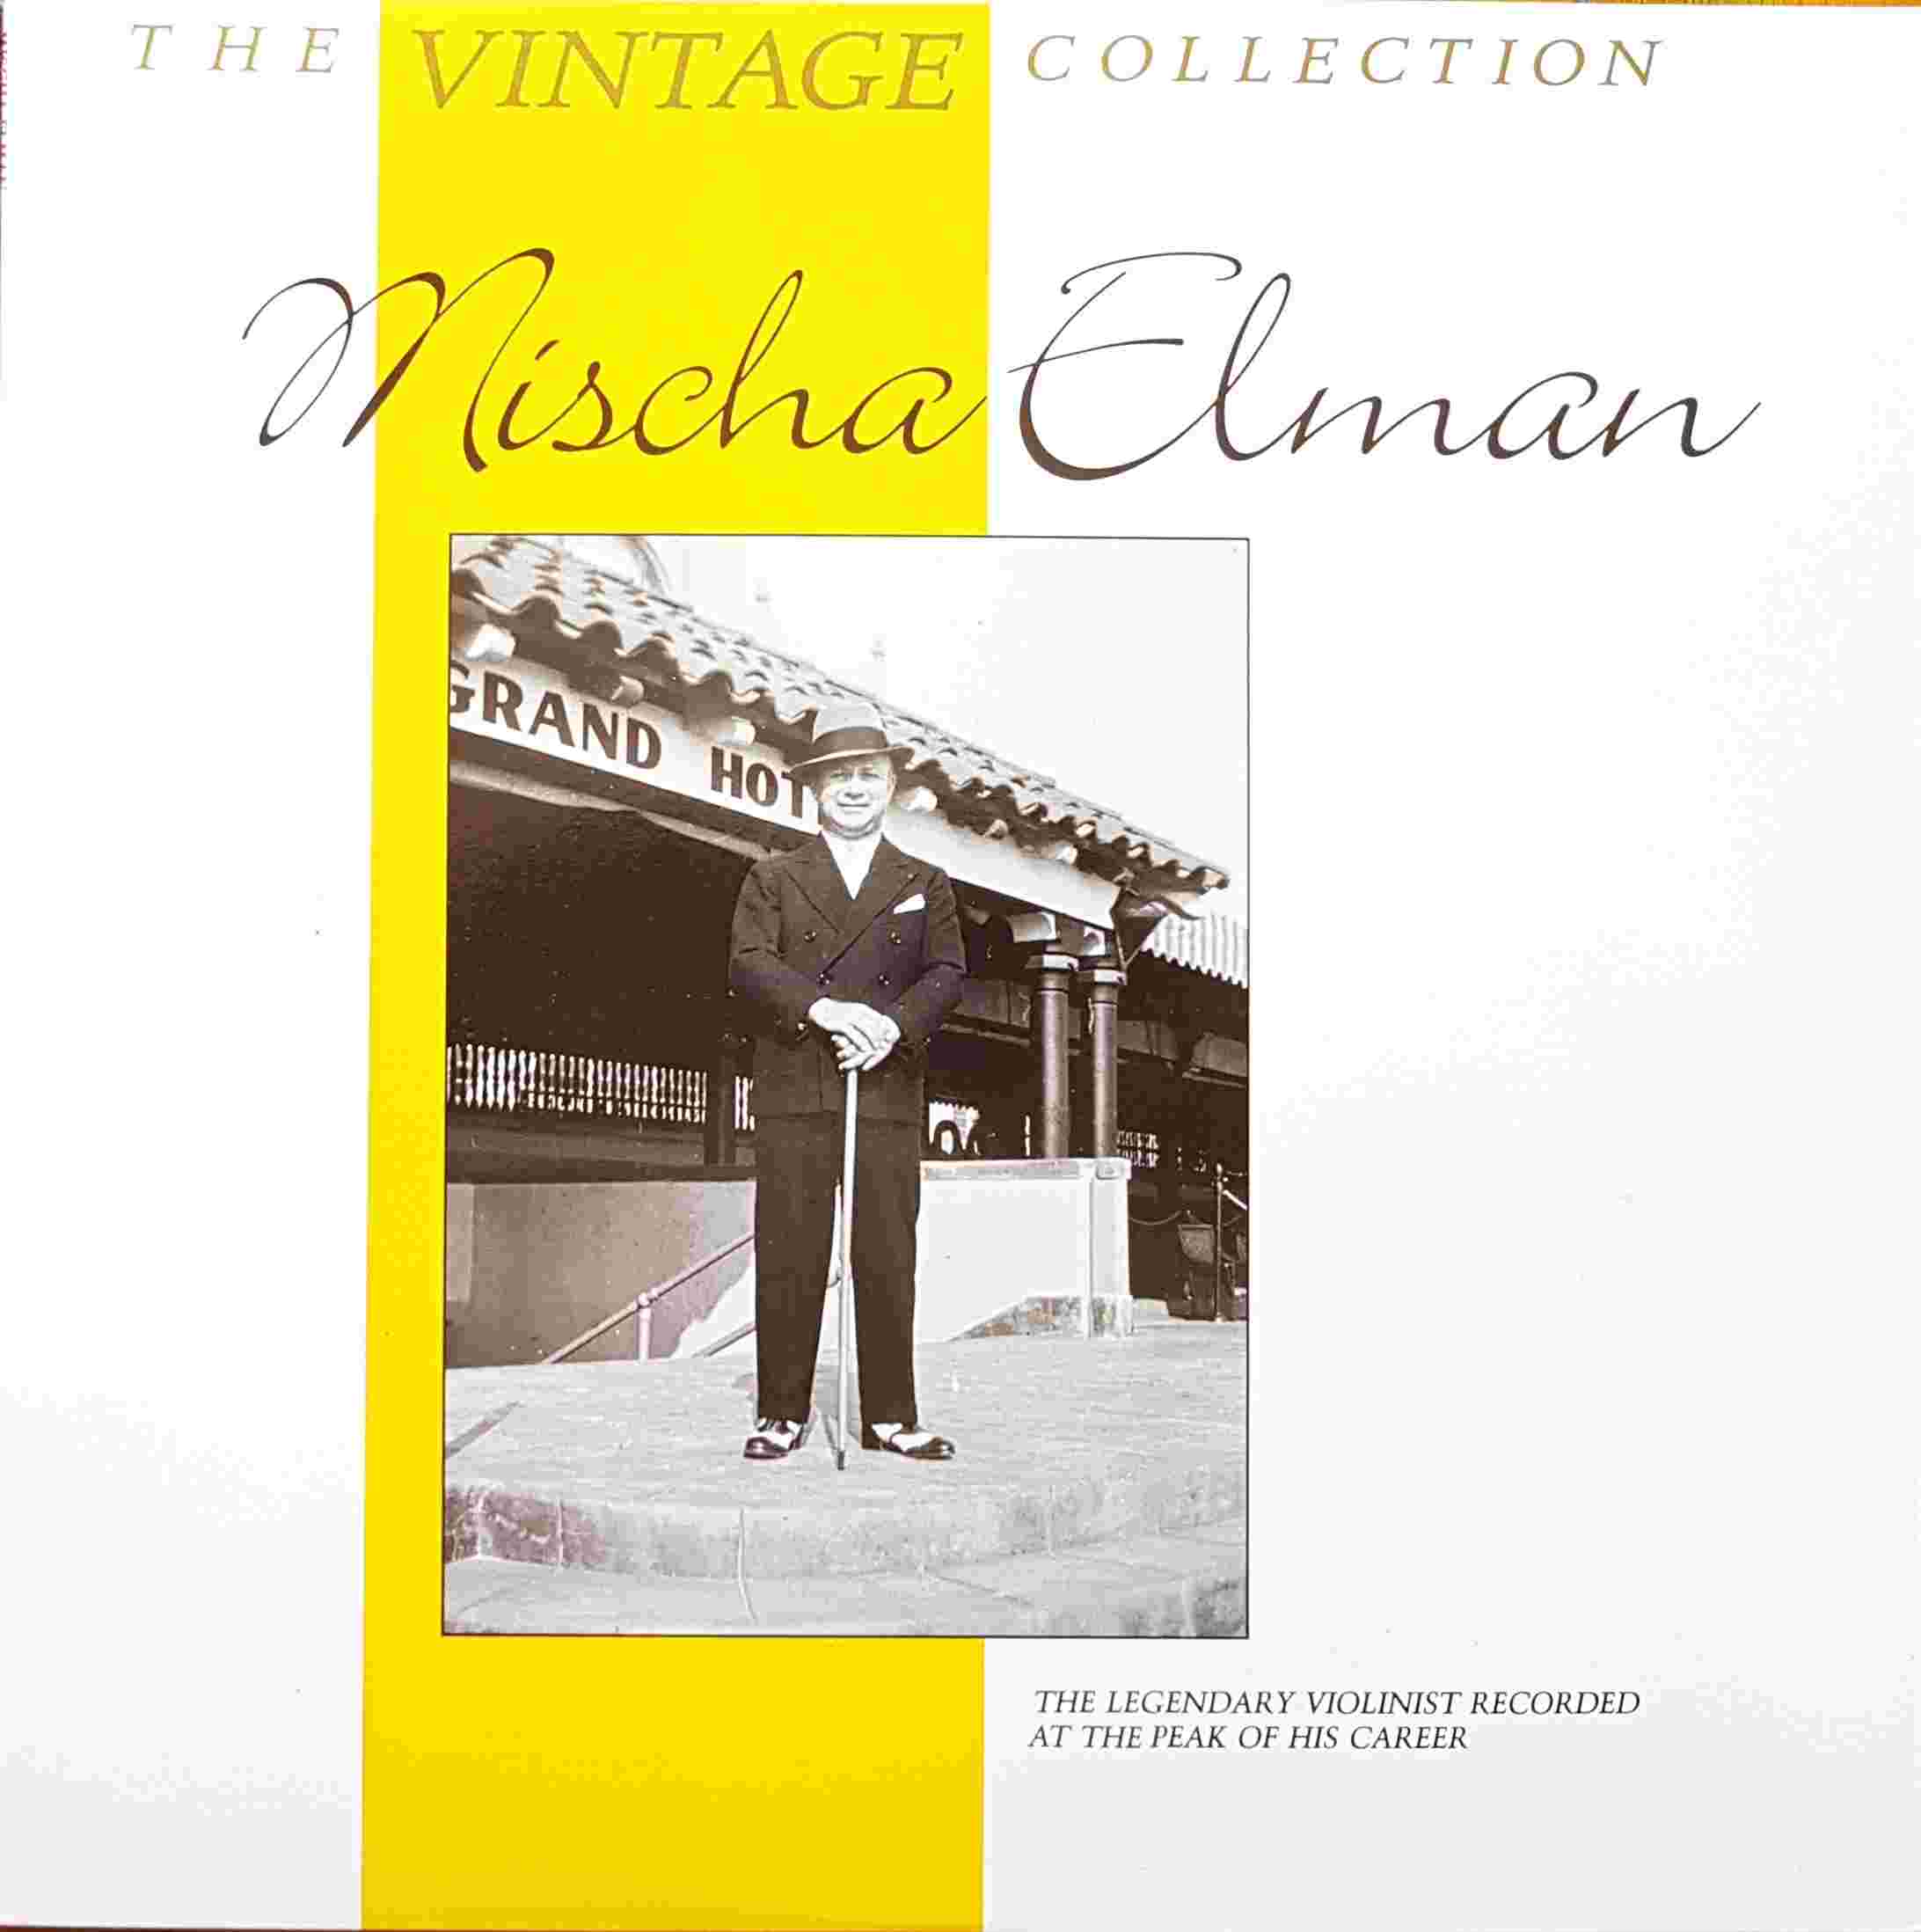 Picture of REH 717 The vintage collection - Mischa Elman by artist Tchaikovsky / Beethoven / Mischa Elman with orchestra from the BBC albums - Records and Tapes library